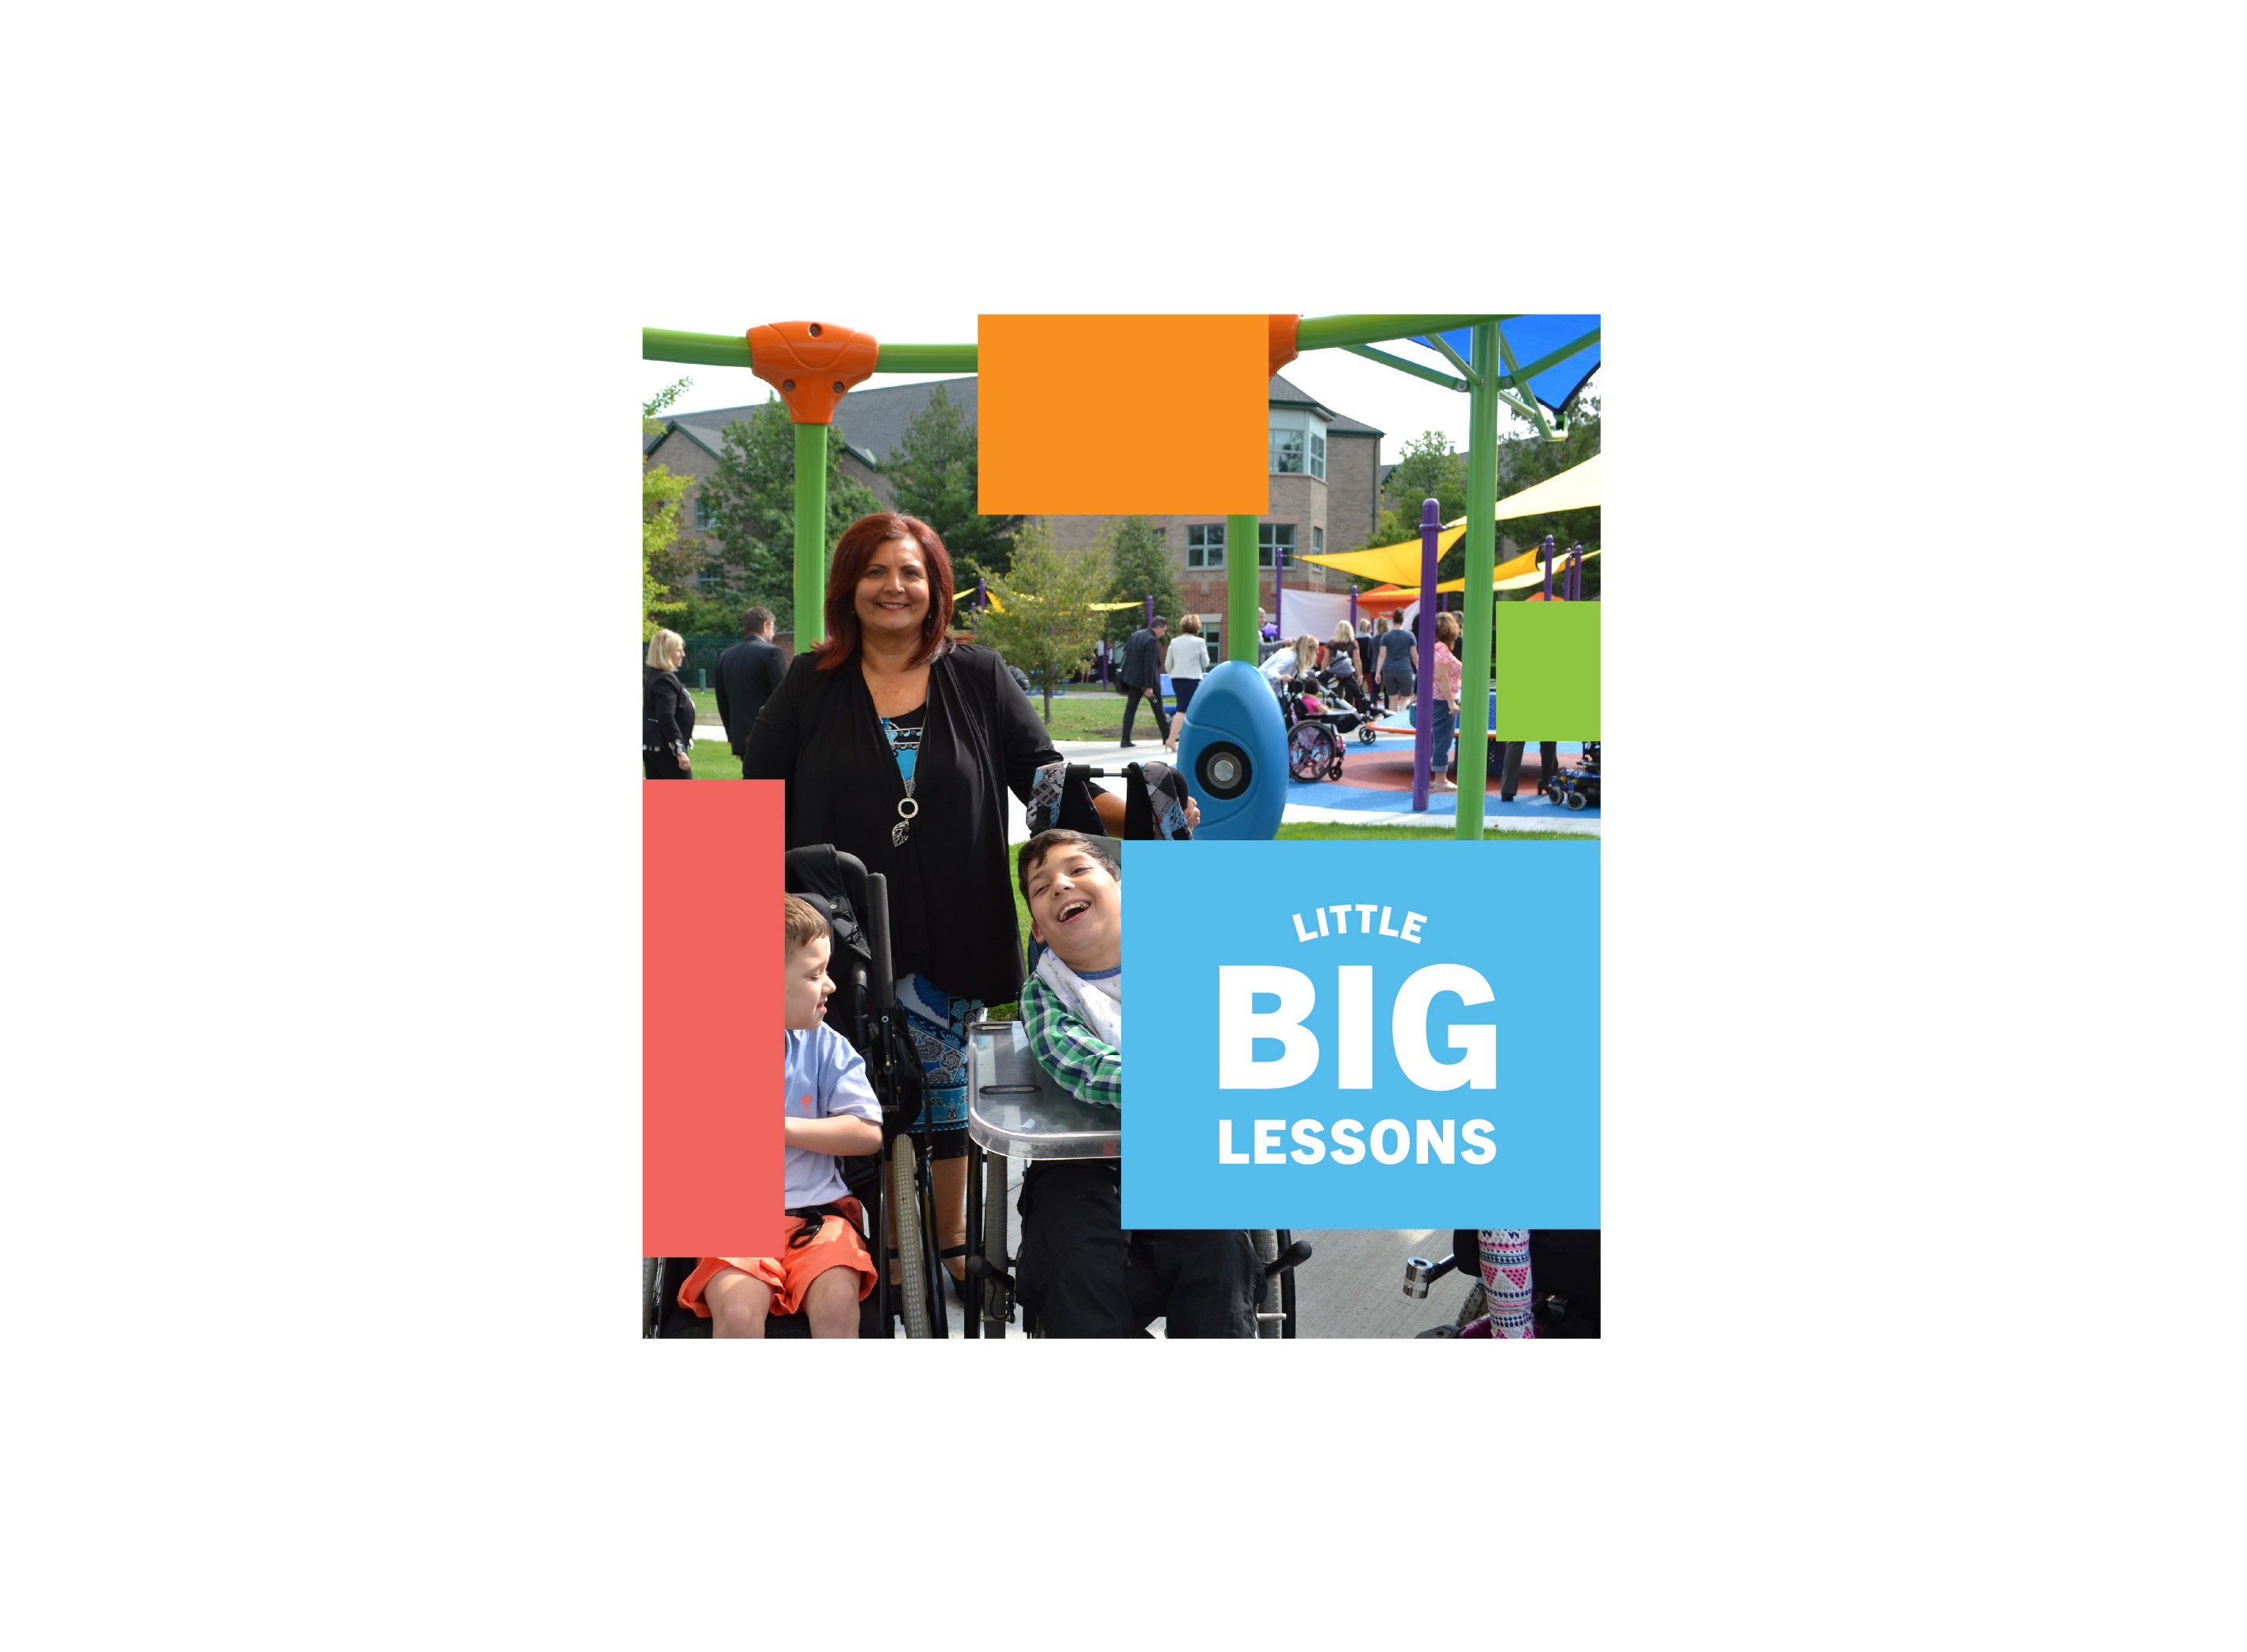 Woman with two children in wheelchairs enjoying an accessible play space. Little Big Lessons logo text.